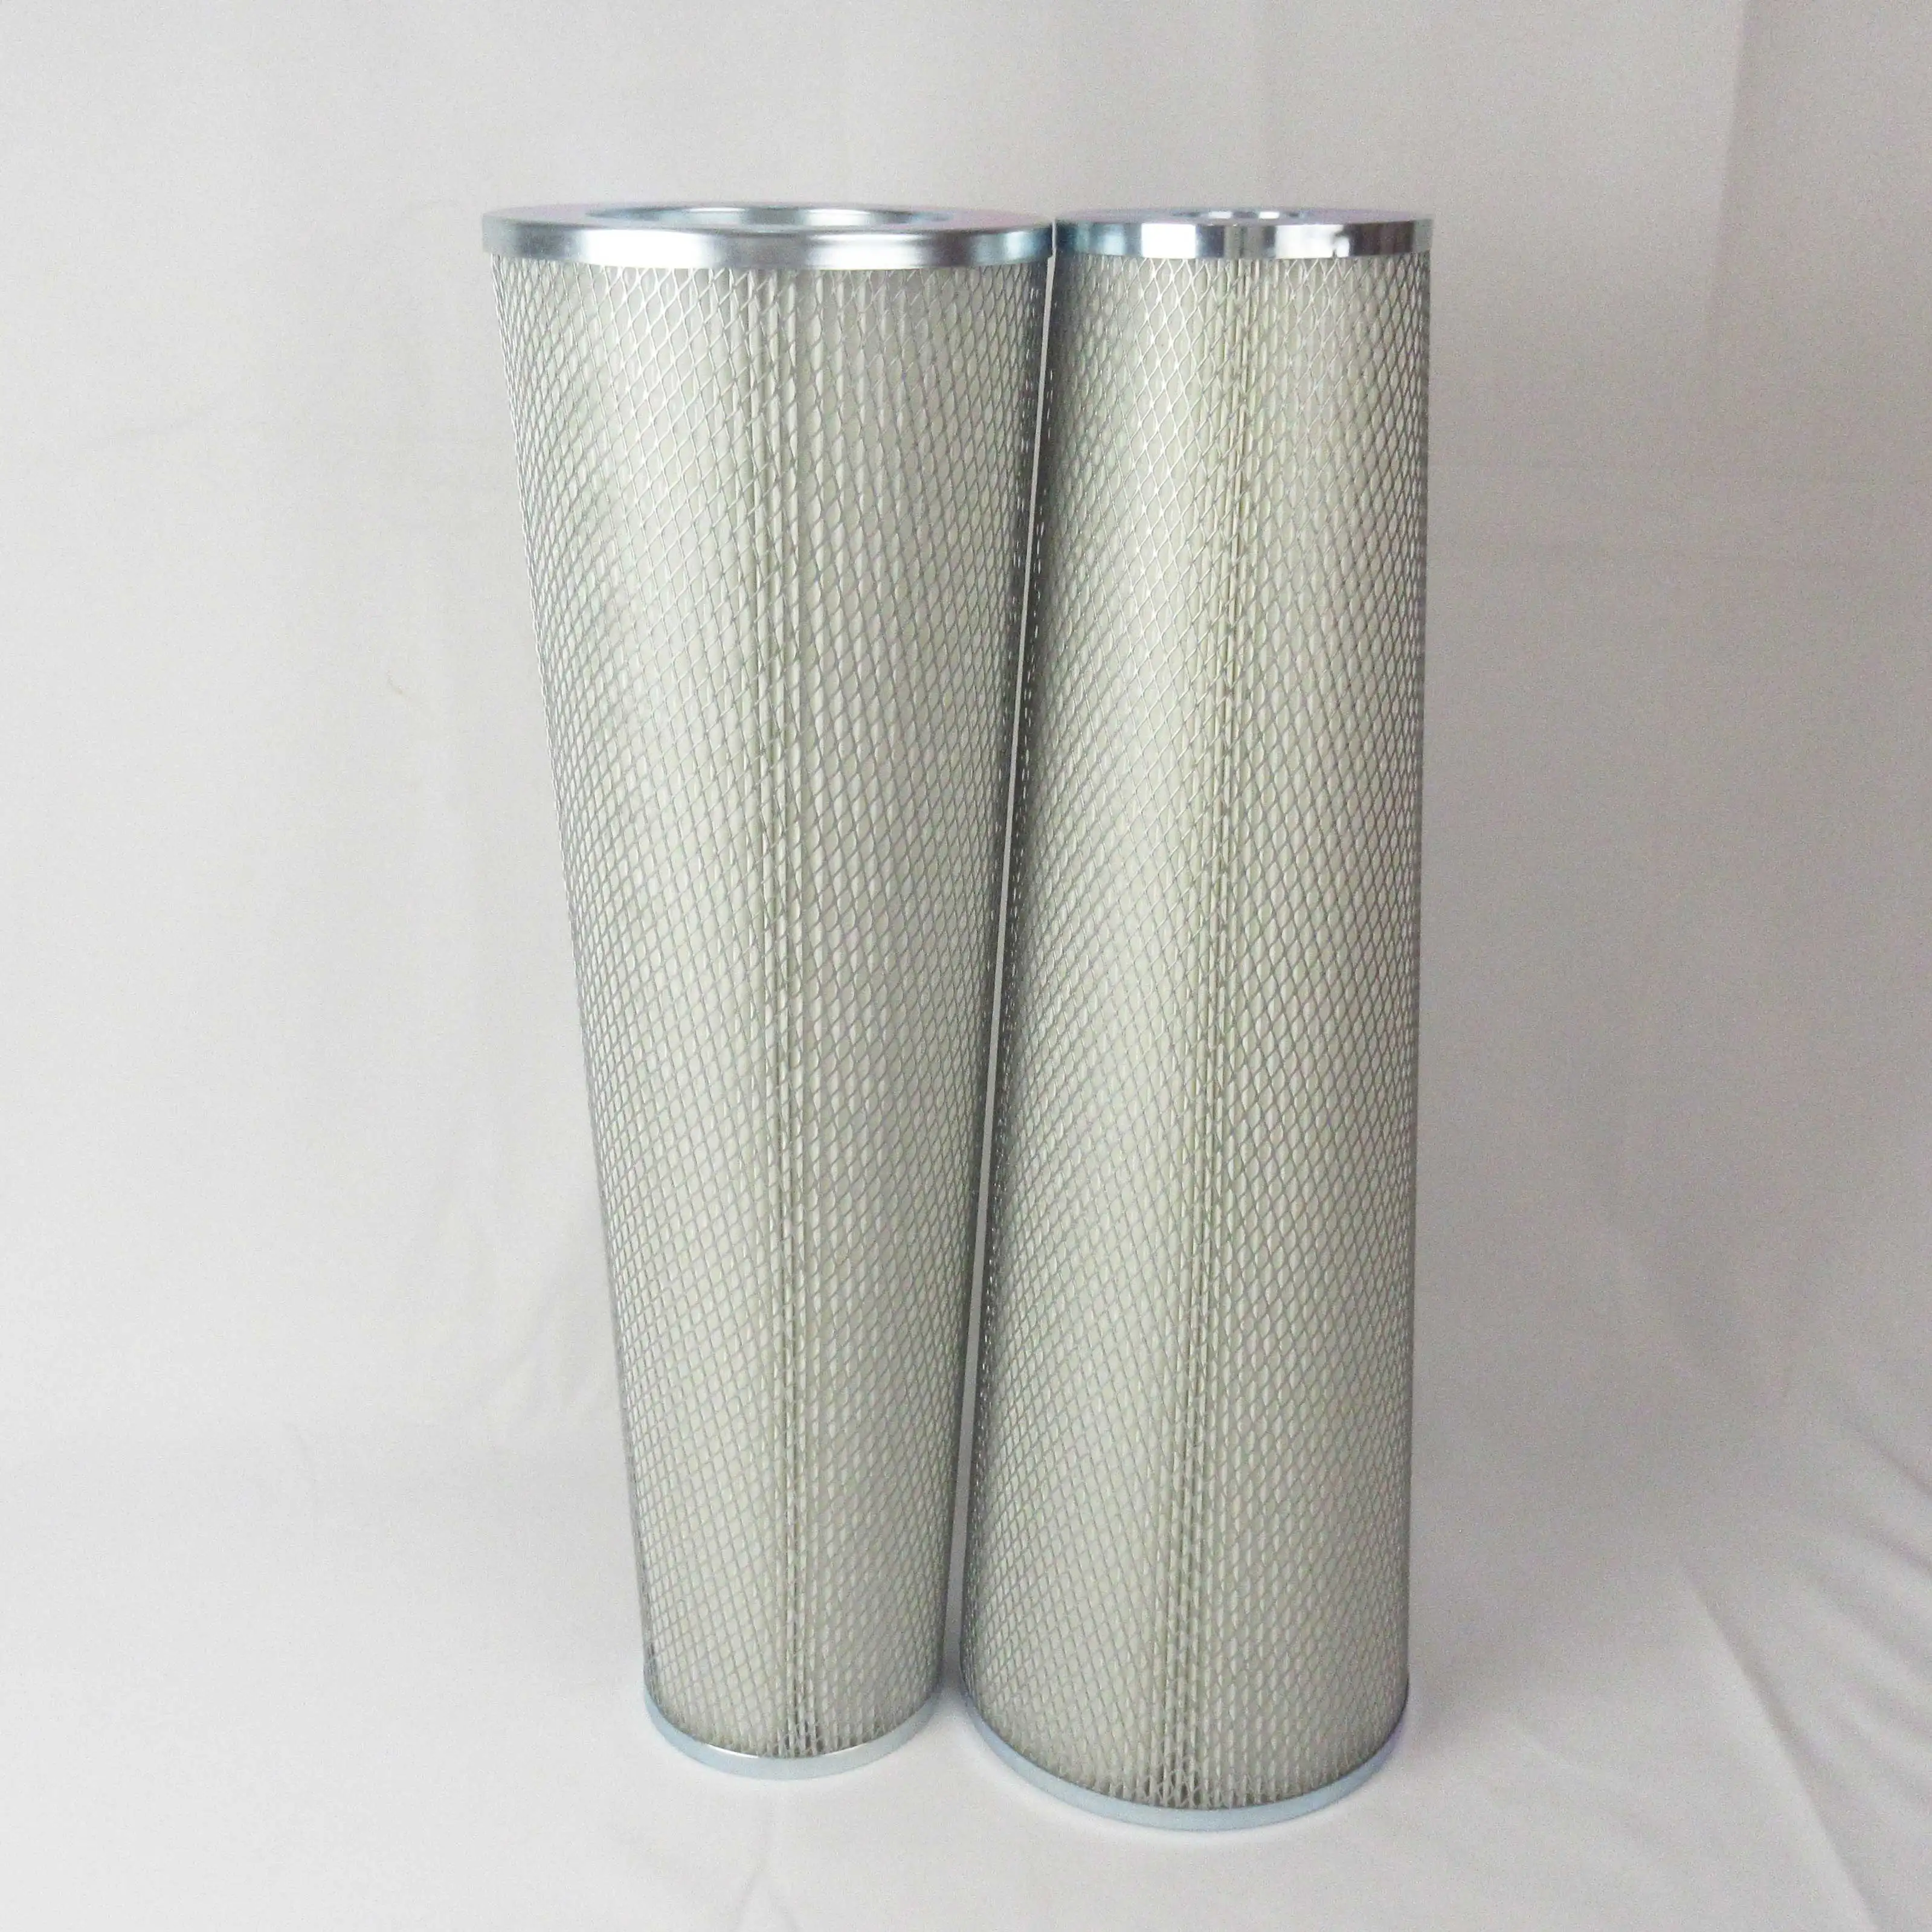 Topep Customized Conical Type Air Filter Cartridge Top147 Lower220 Height710 Polyester Cloth Dust Collector Filter